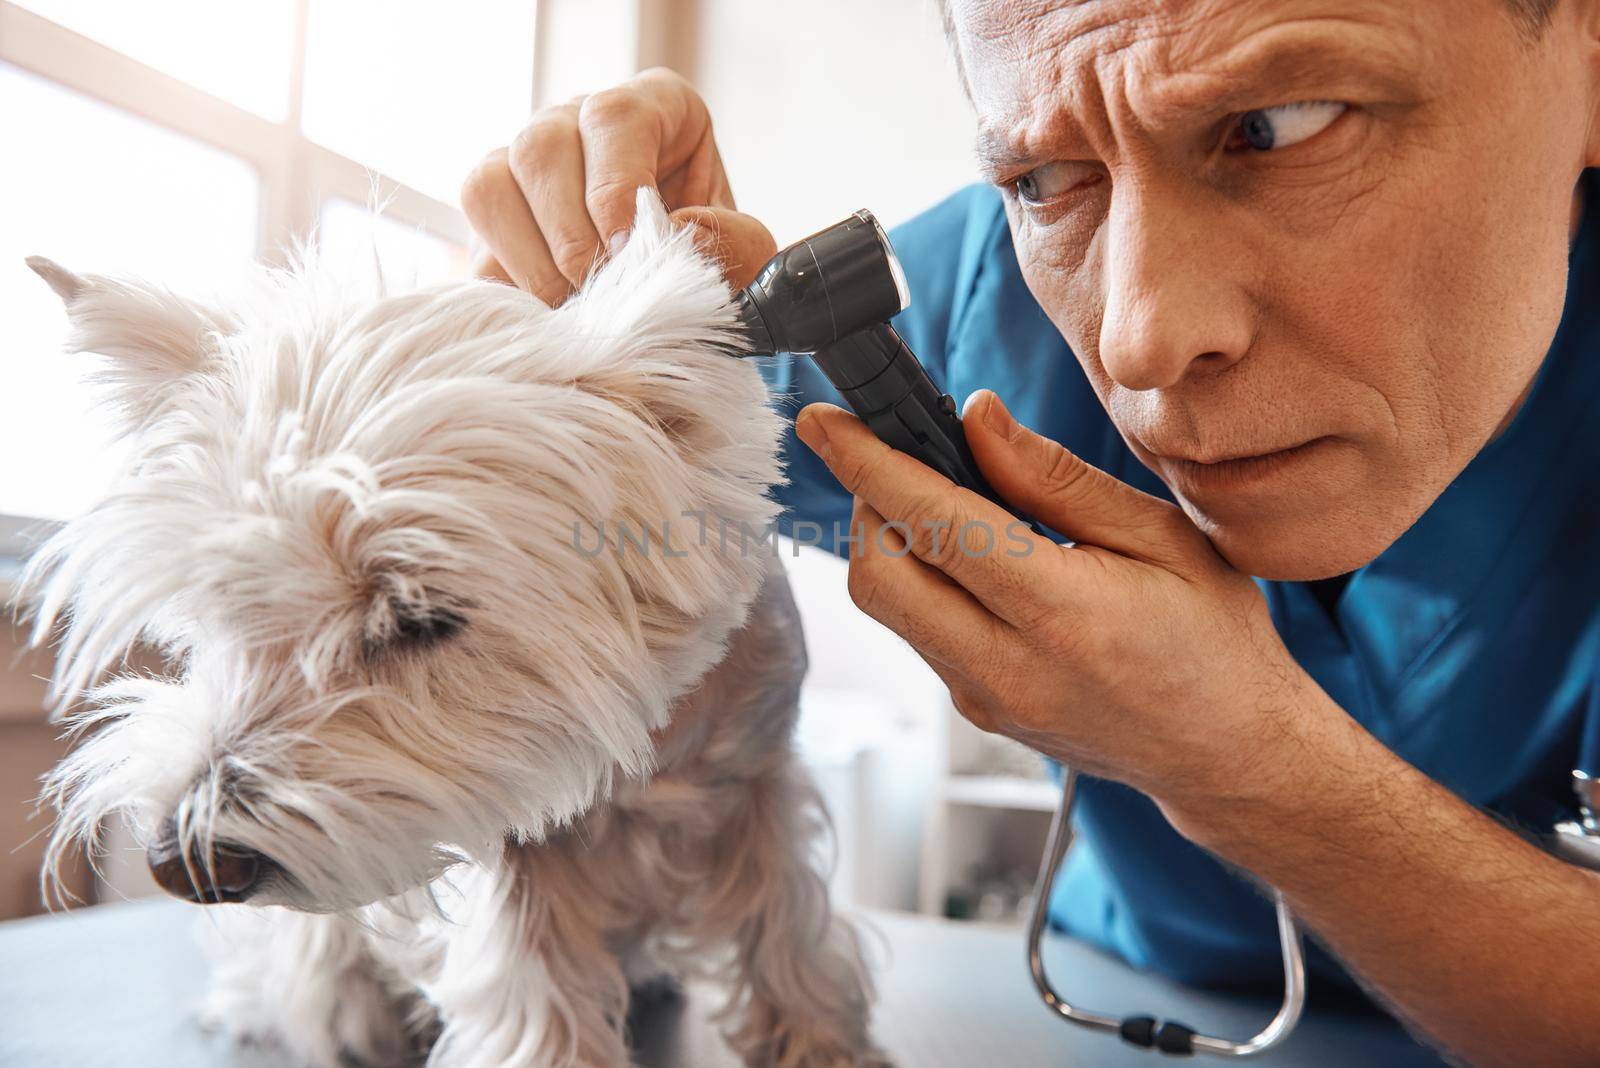 I have to be very attentive. Serious middle aged vet is checking dog's ear while working at veterinary clinic by friendsstock